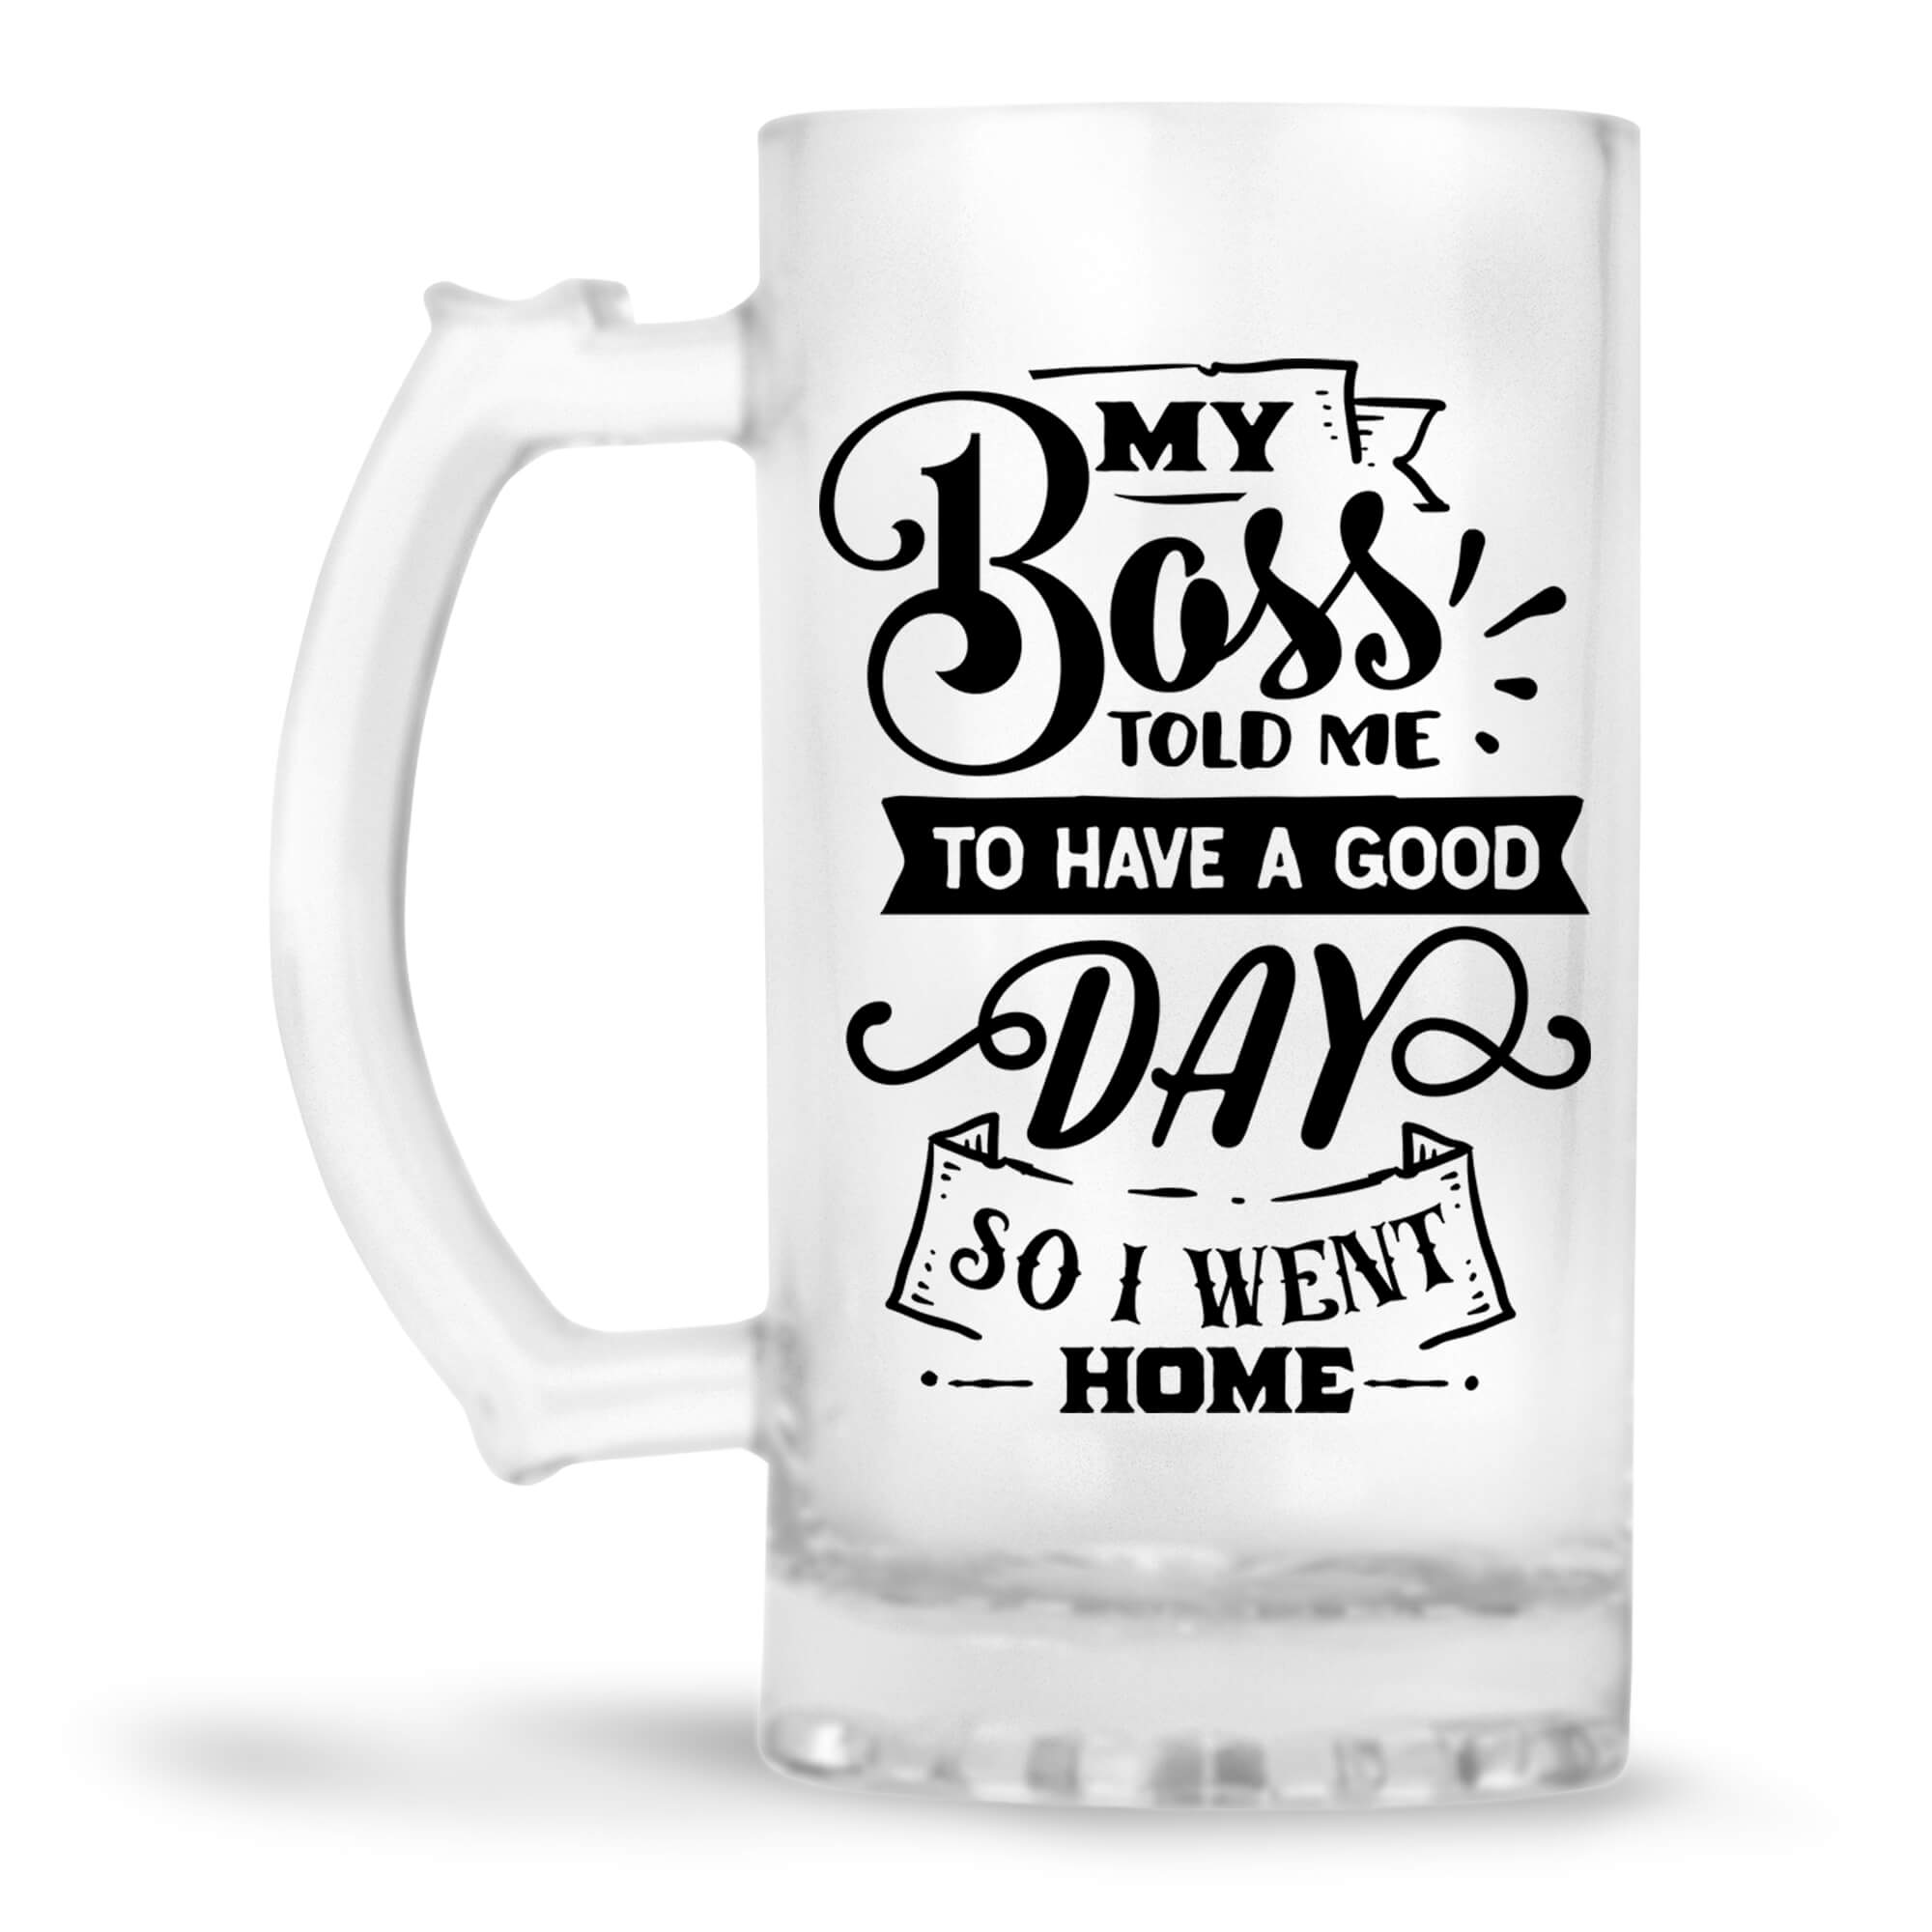 My Boss Told Me To Have A Good Day Beer Mug